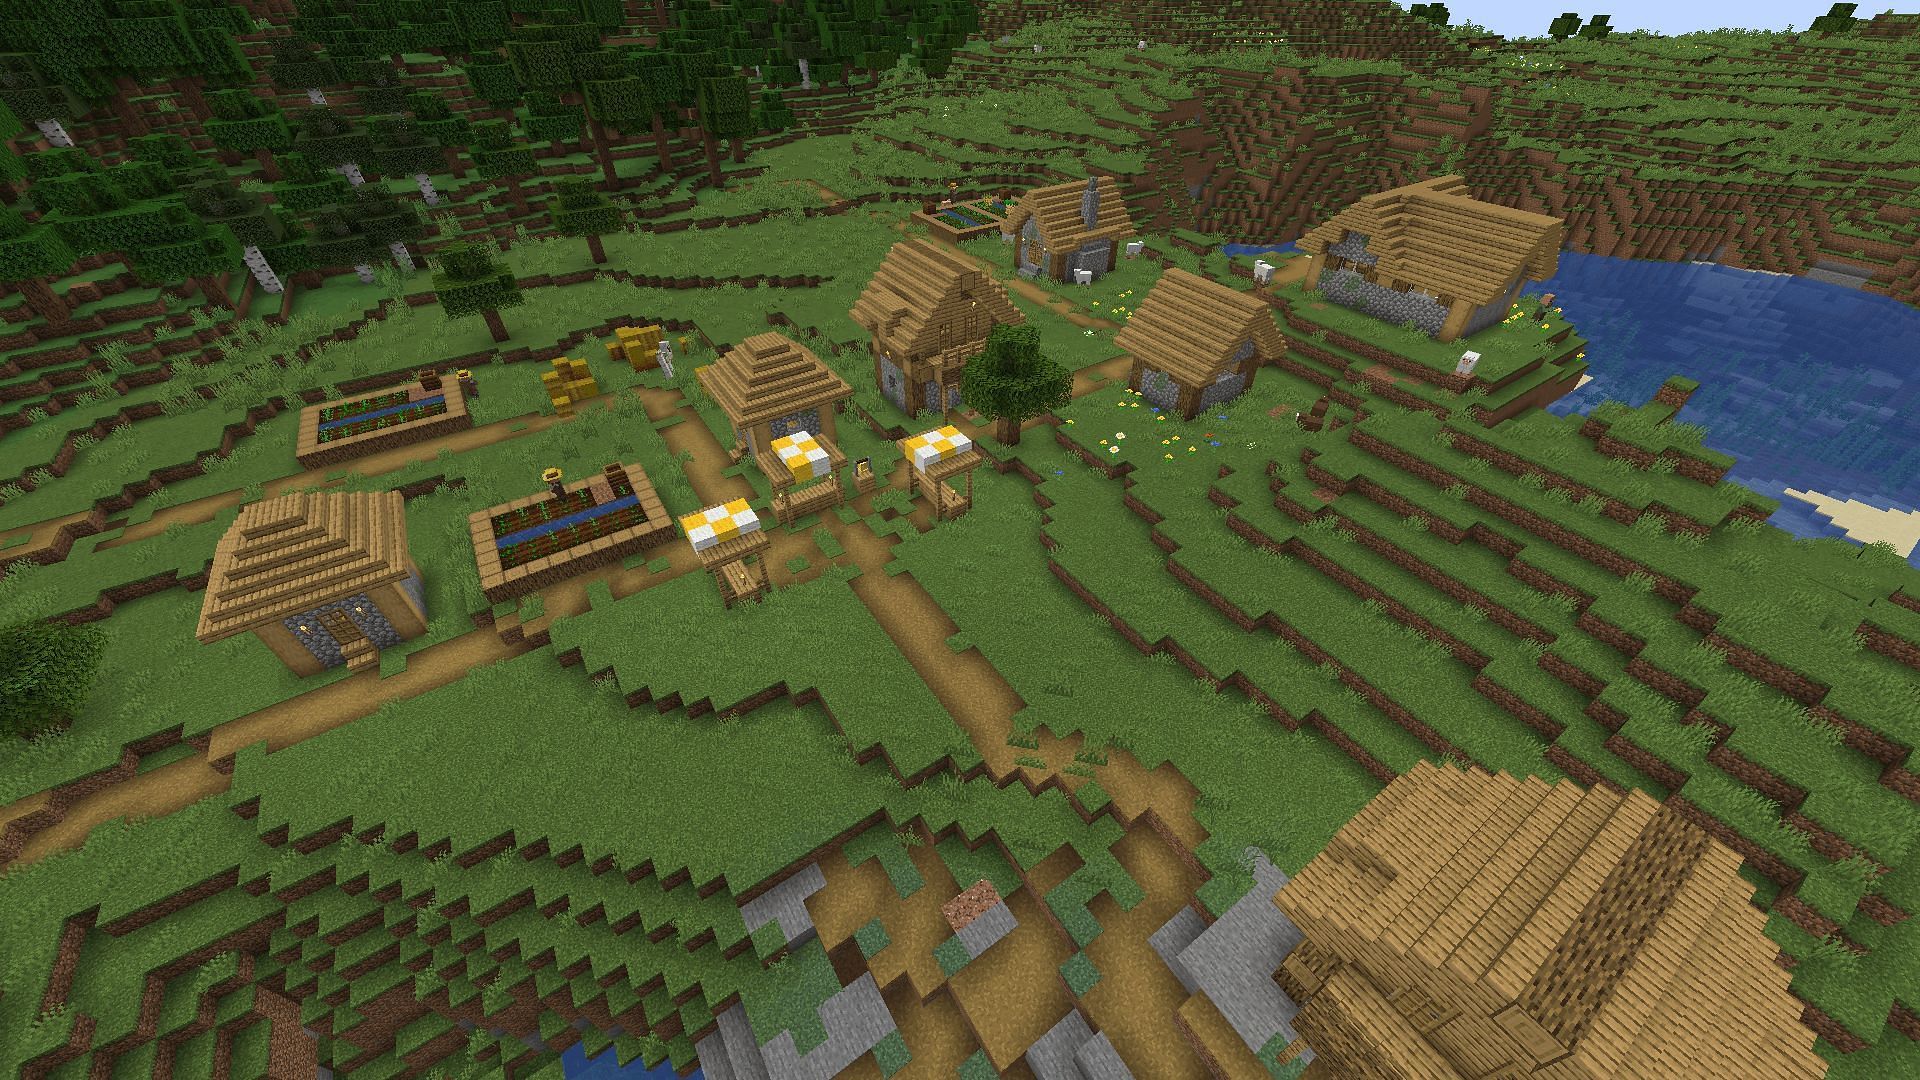 An example of a village in game (Image via Minecraft)